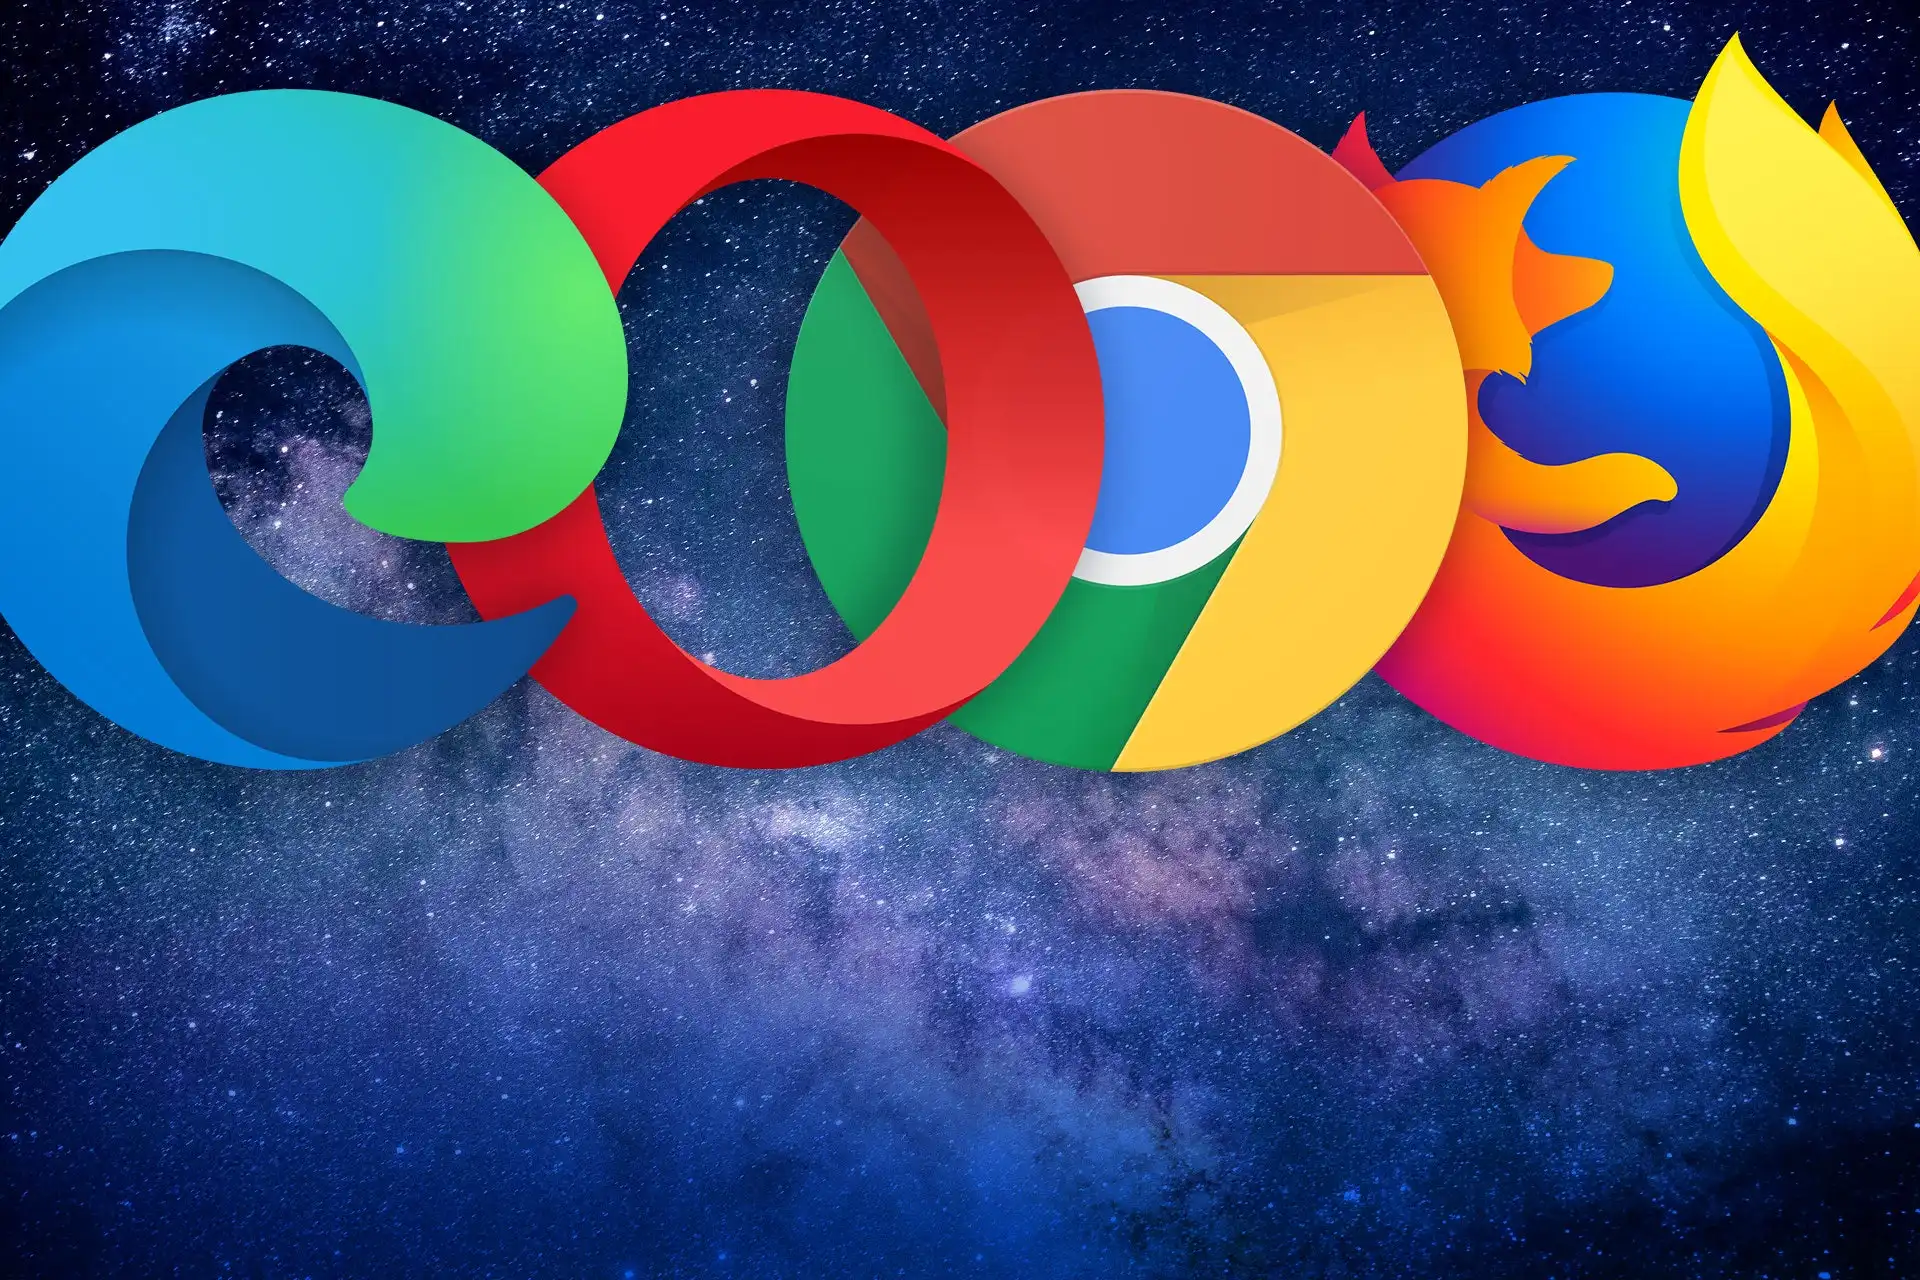 Chrome vs. Power: Which browser is better for business?